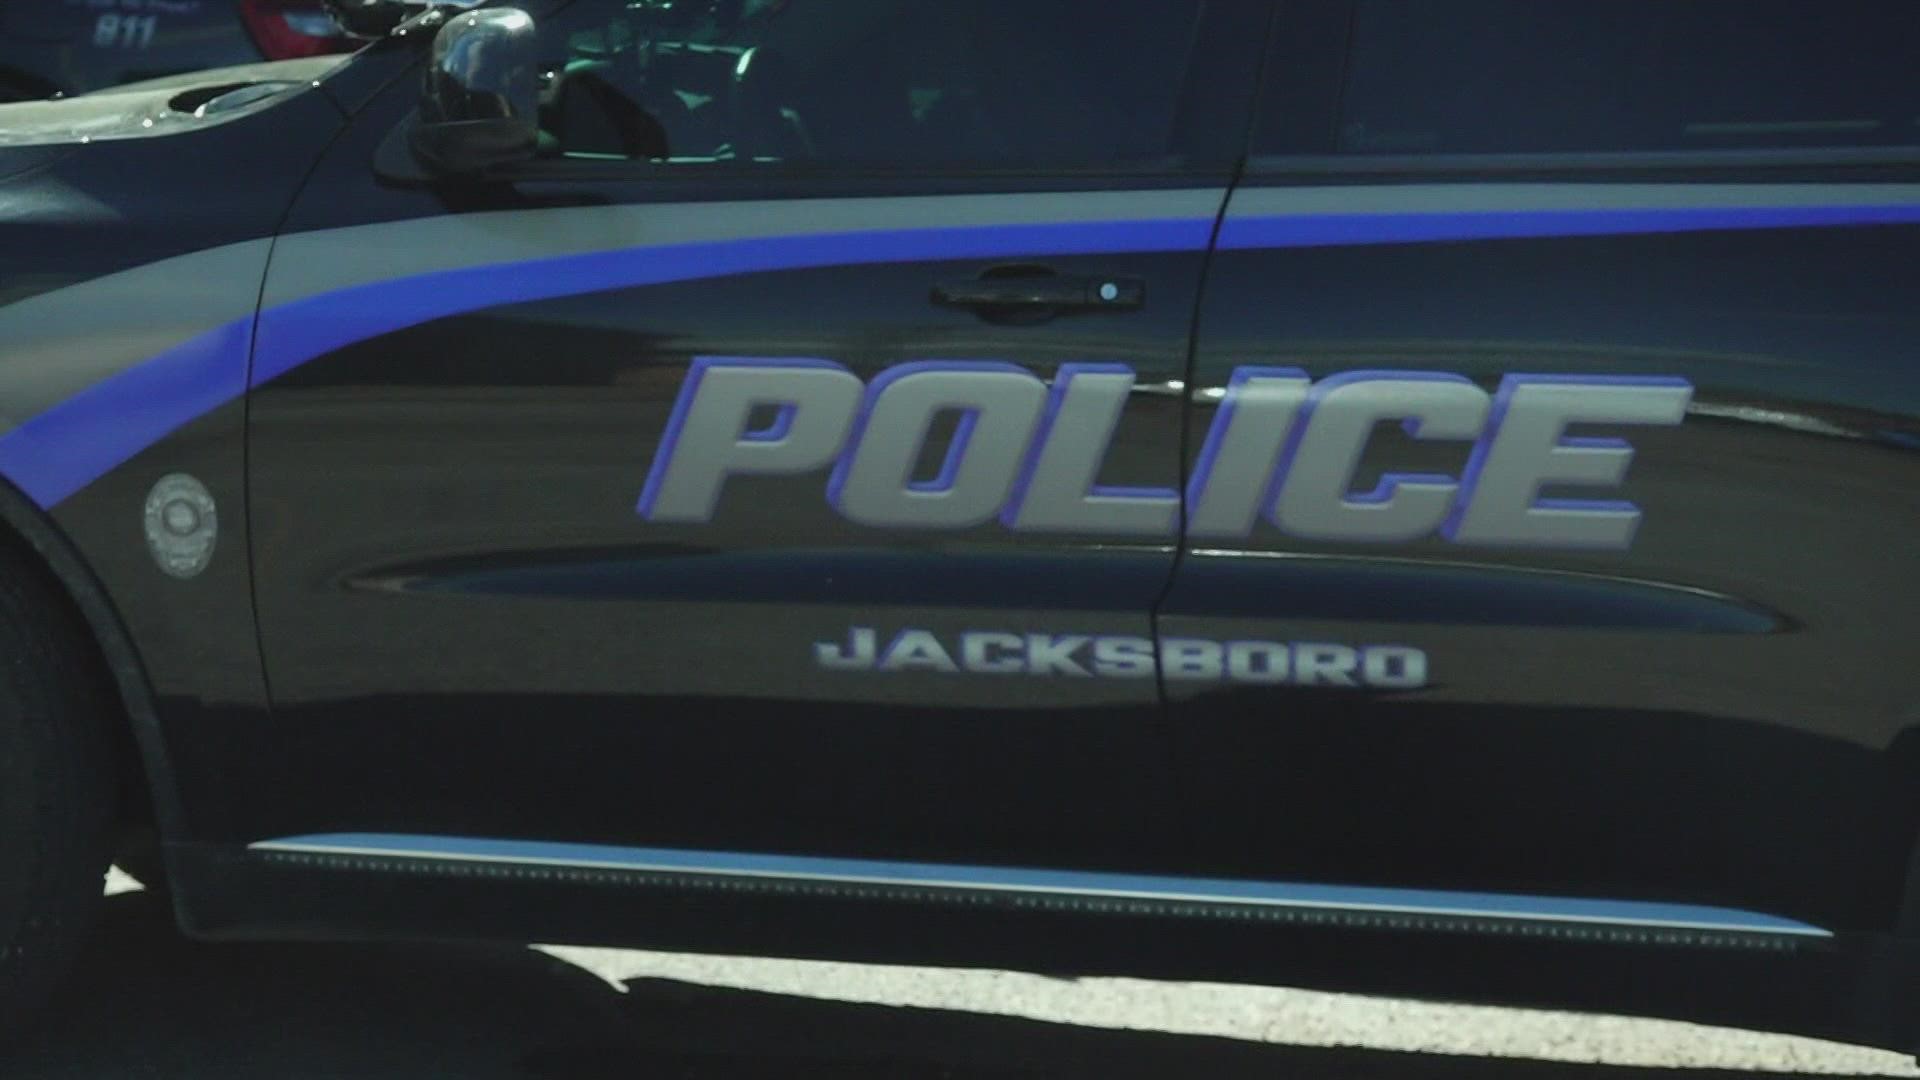 Most of the Jacksboro Police Department walked off the job. The city attorney said 3 of 4 total officers, including the police chief resigned.